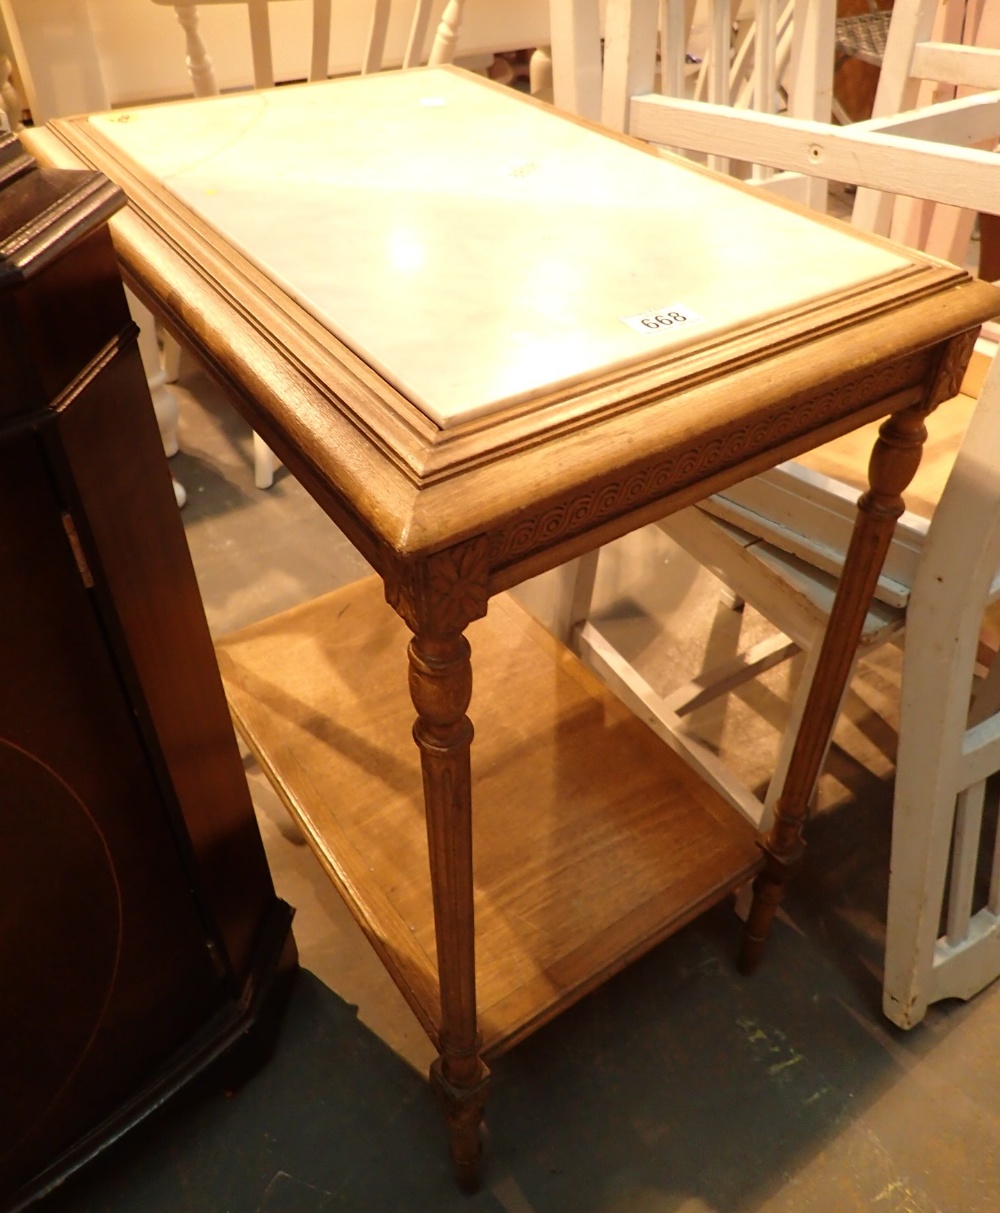 Small two tiered table with marble top a